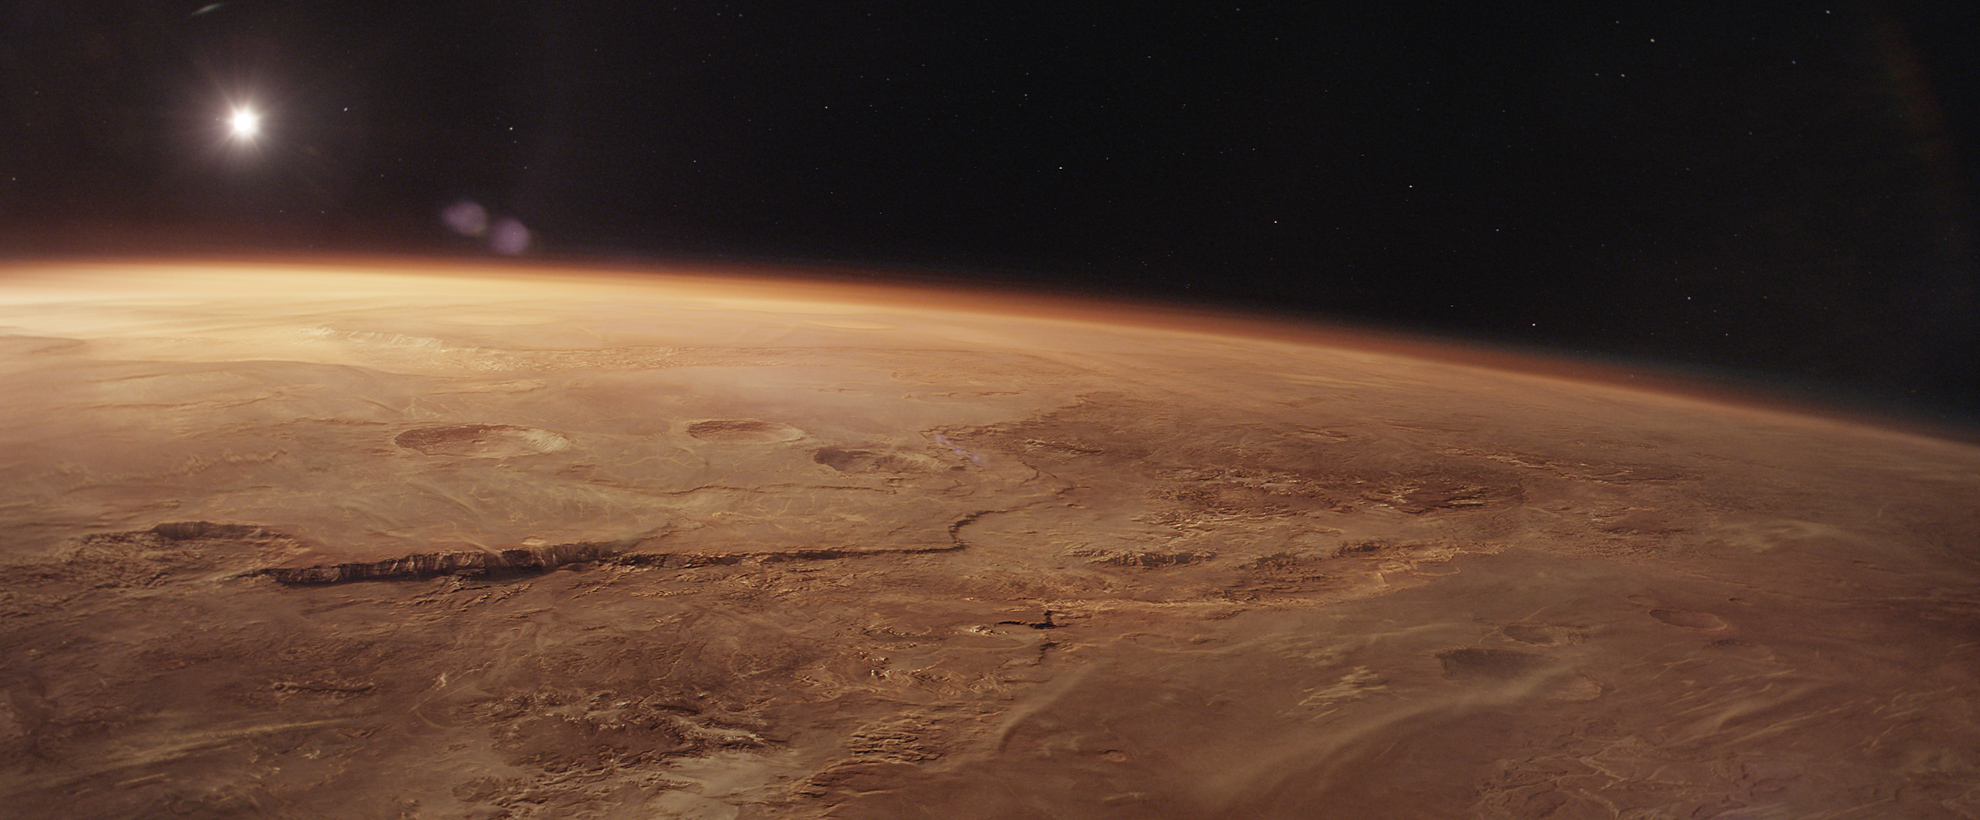 A photoreal CG rendering of the surface of Mars